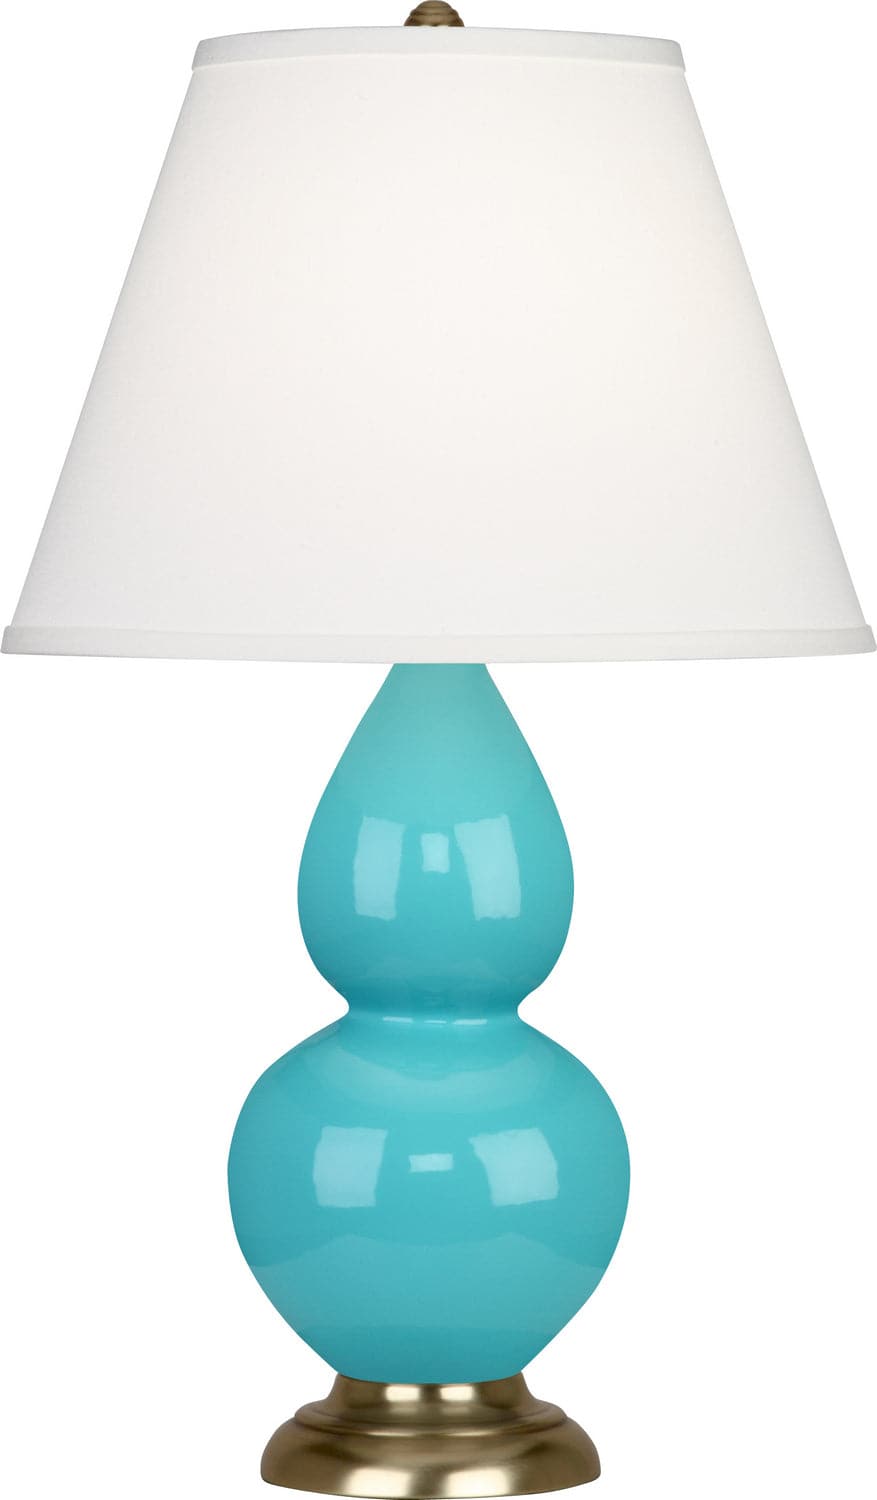 Robert Abbey - 1760X - One Light Accent Lamp - Small Double Gourd - Egg Blue Glazed Antique Brass